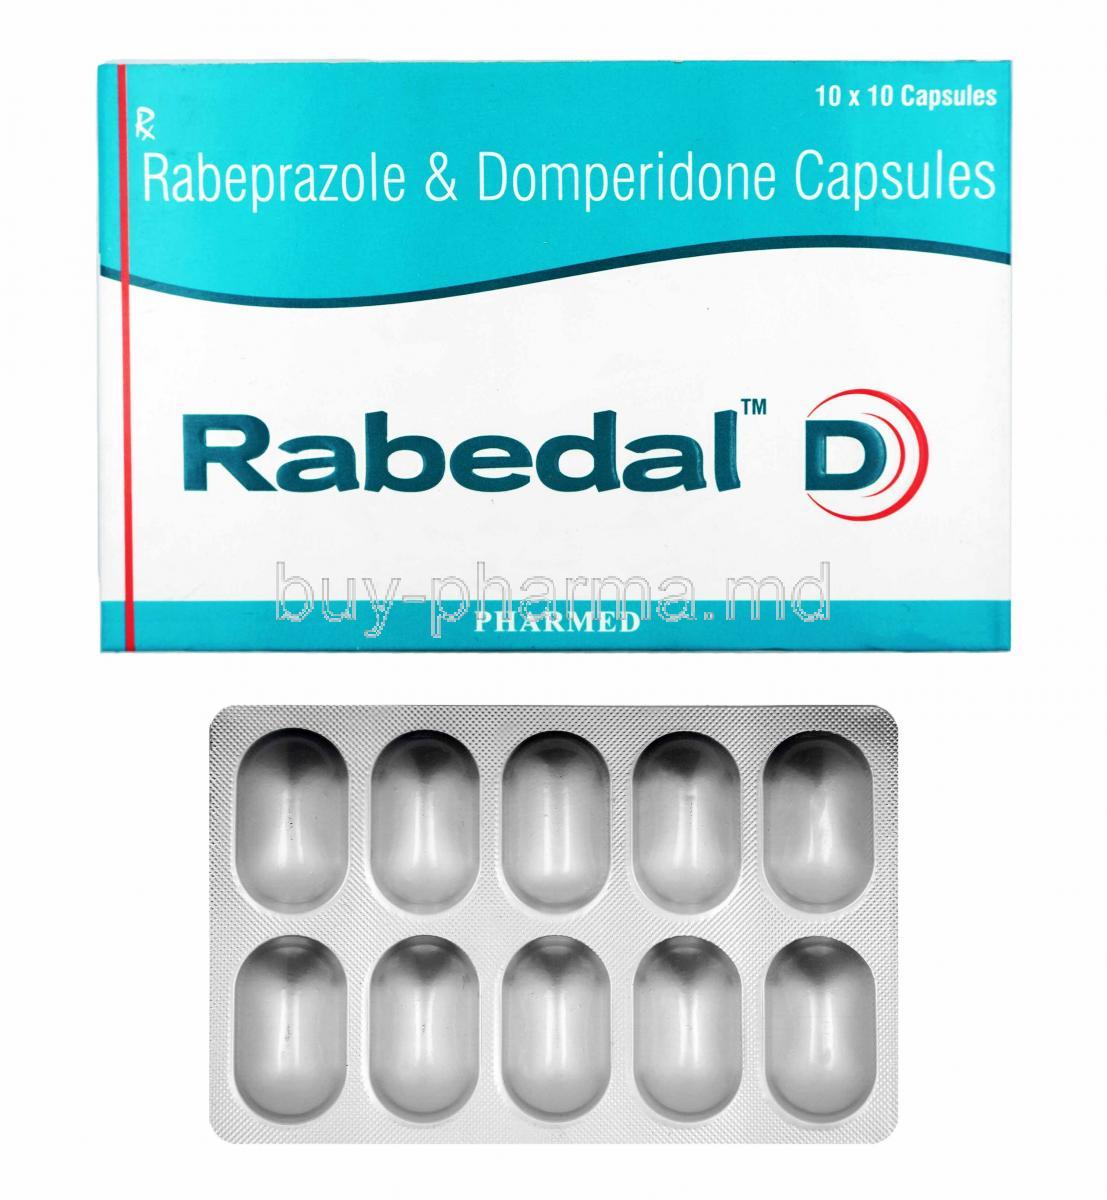 Rabedal D, Domperidone and Rabeprazole box and capsules